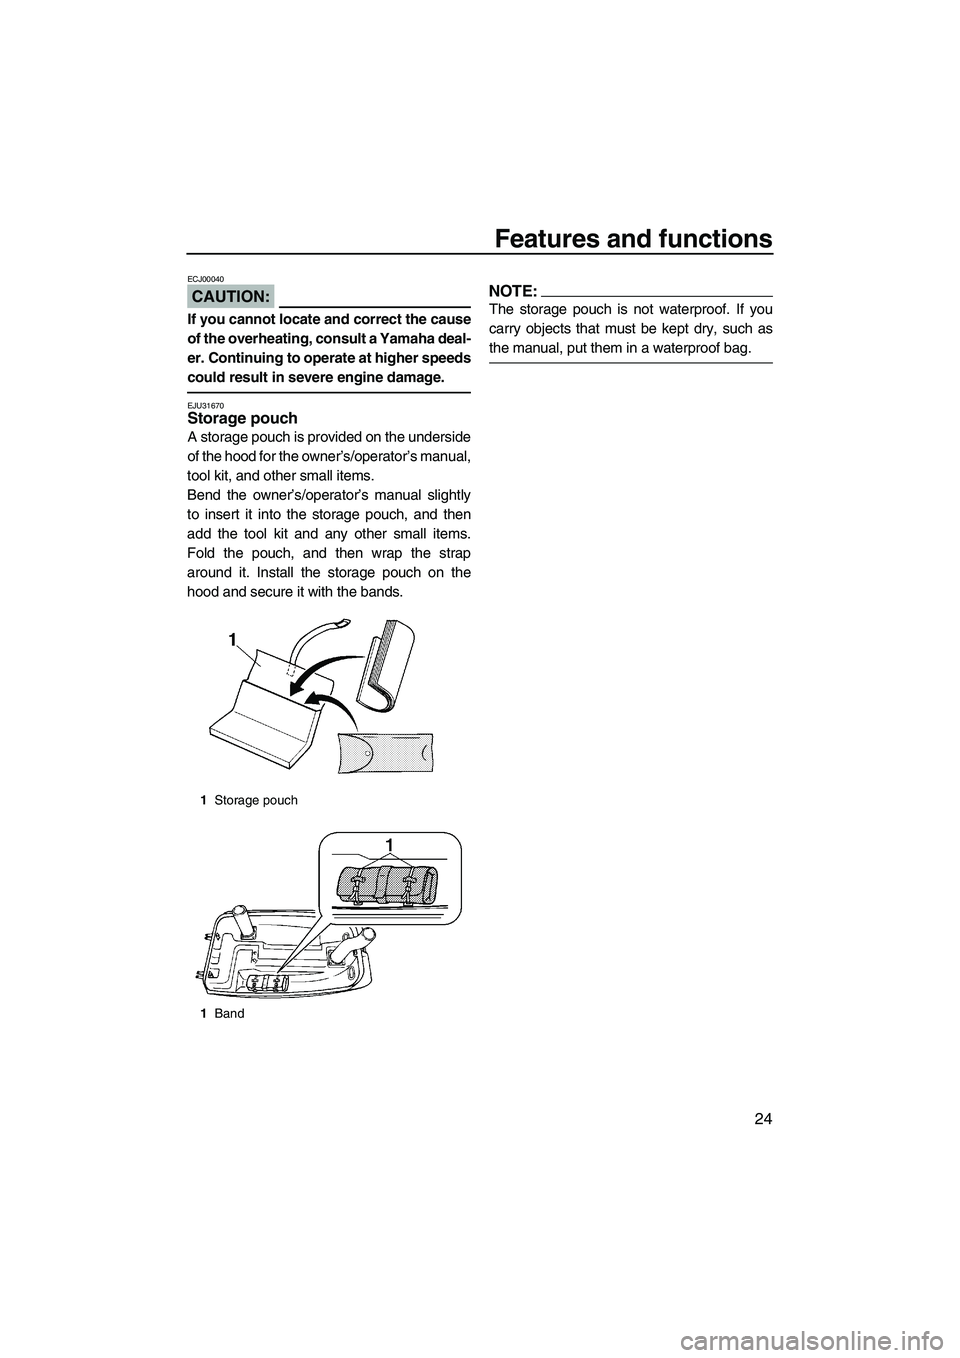 YAMAHA SUPERJET 2007 Owners Guide Features and functions
24
CAUTION:
ECJ00040
If you cannot locate and correct the cause
of the overheating, consult a Yamaha deal-
er. Continuing to operate at higher speeds
could result in severe engi